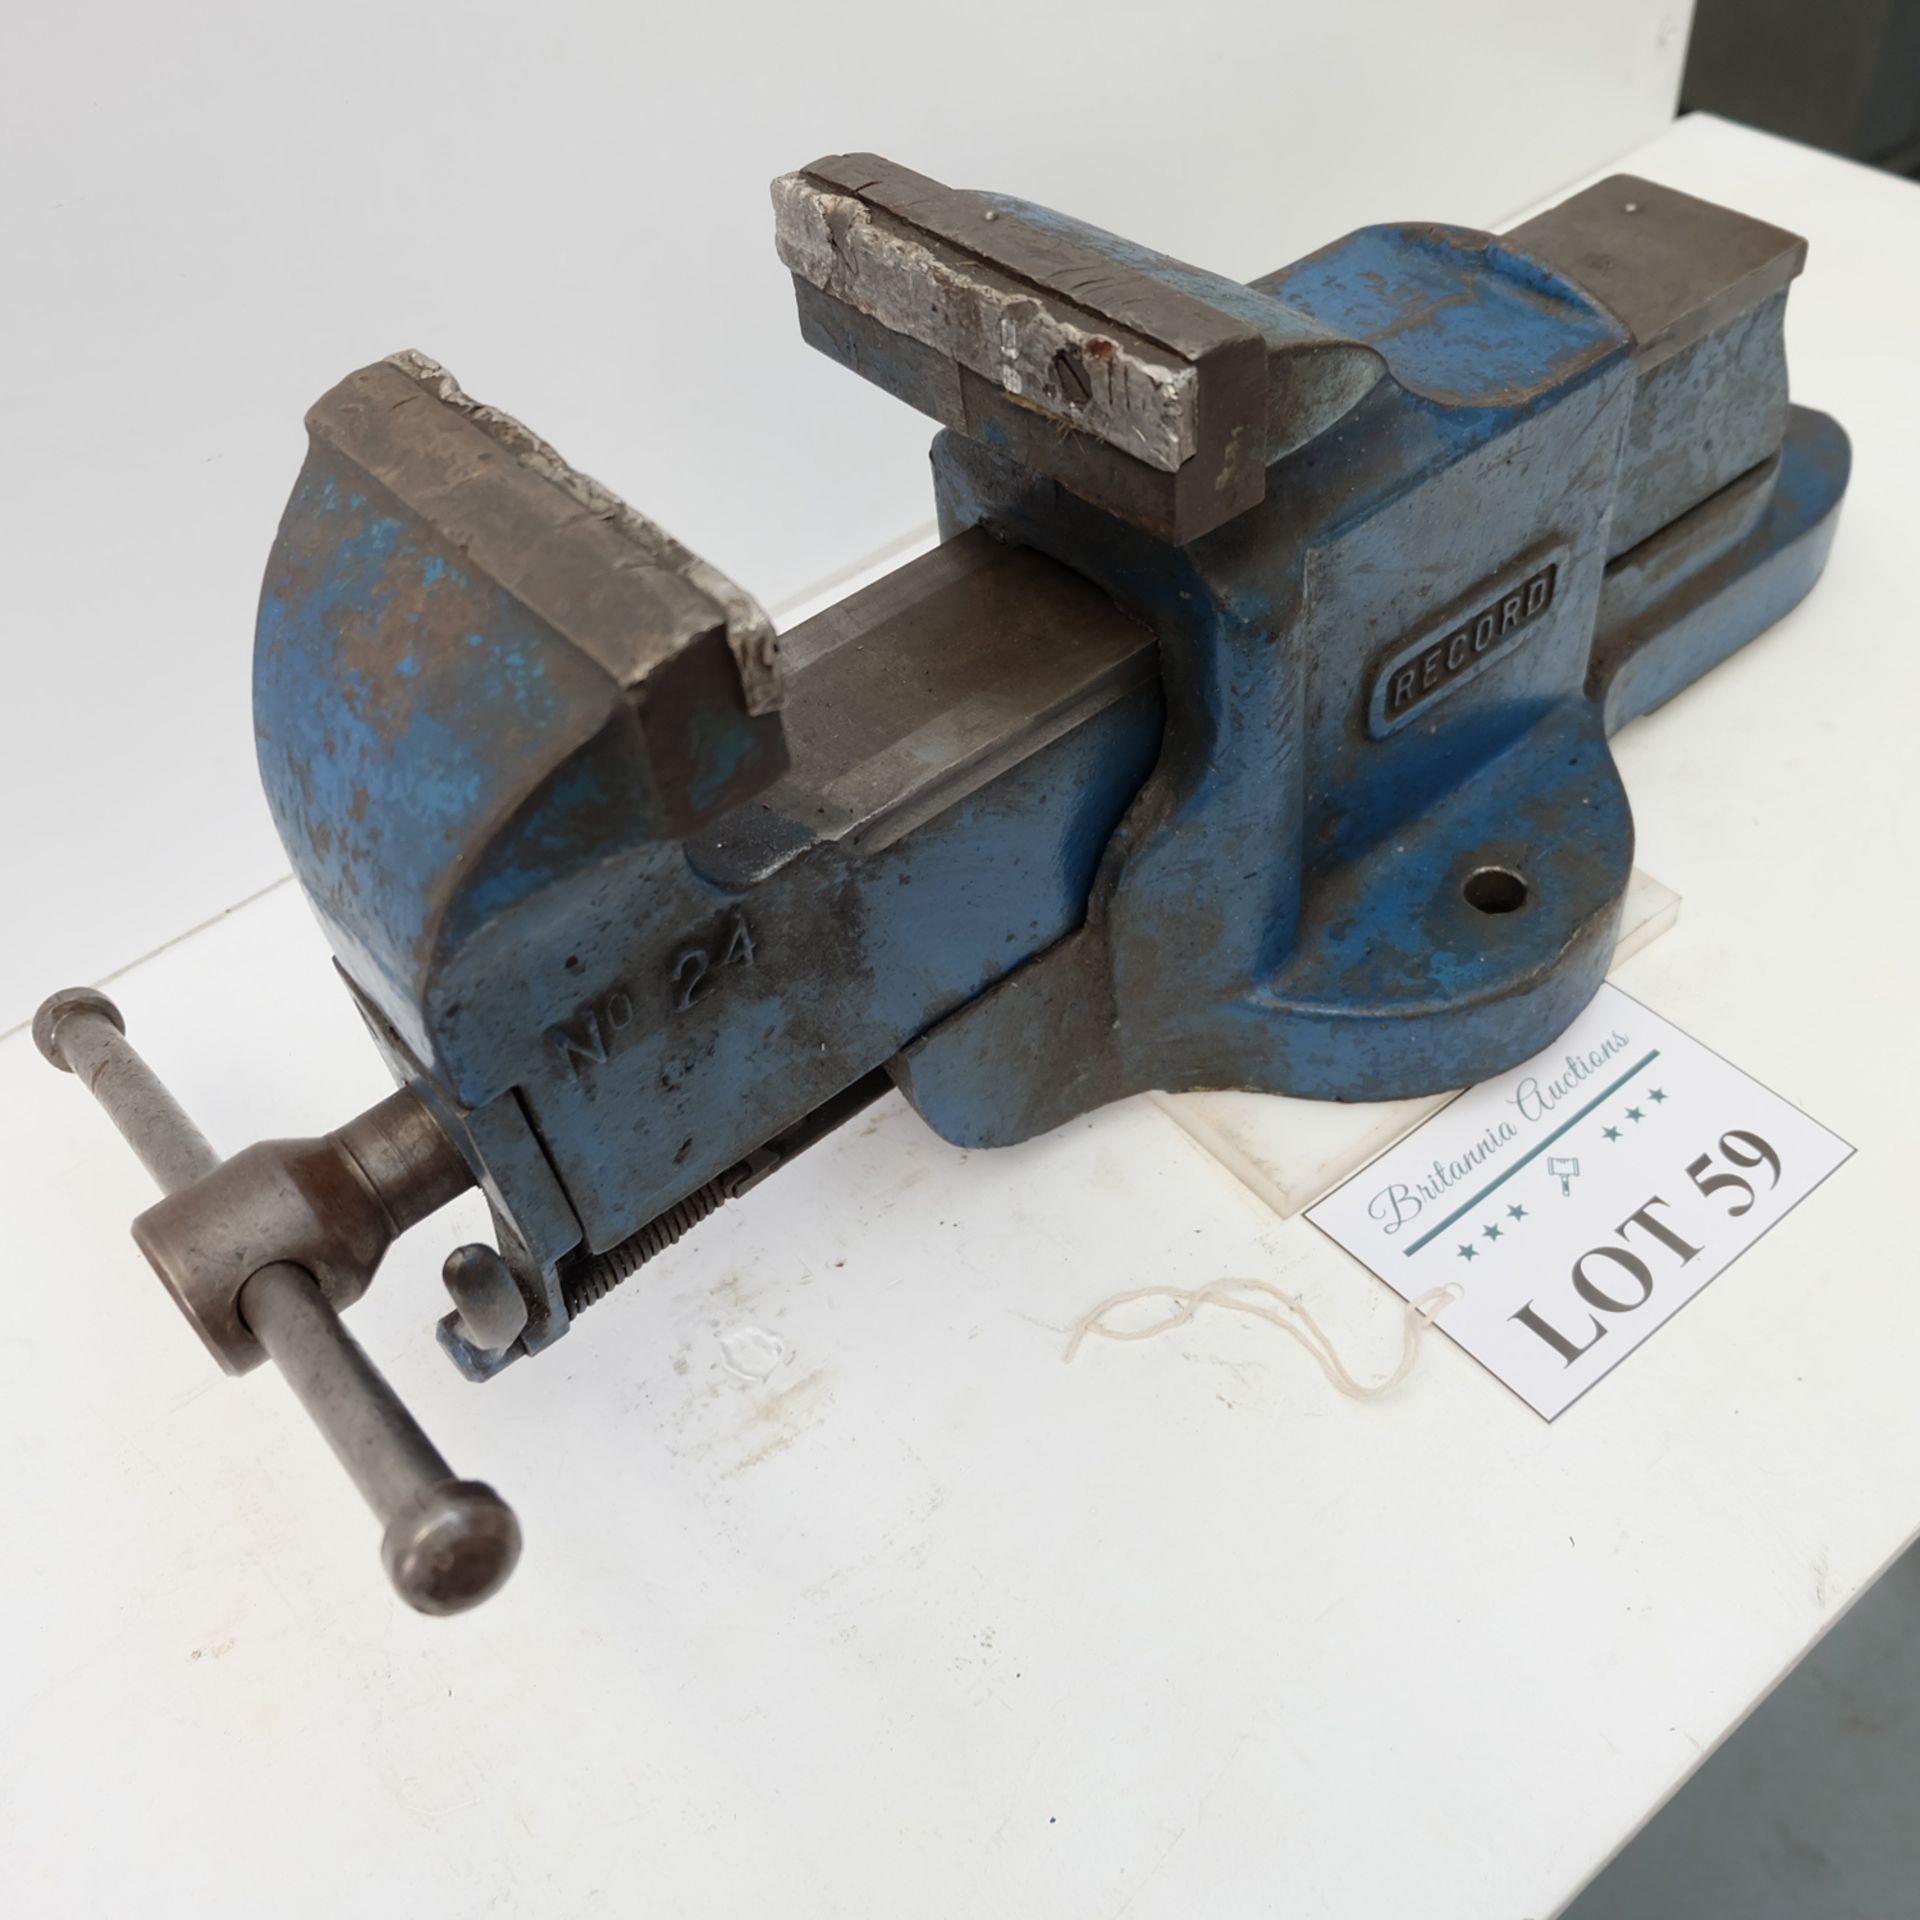 Record No.24 Quick Release Bench Vice. Jaw Width 5 1/2". Max Opening 7". Jaw Height 3 3/4" Approx. - Image 3 of 4